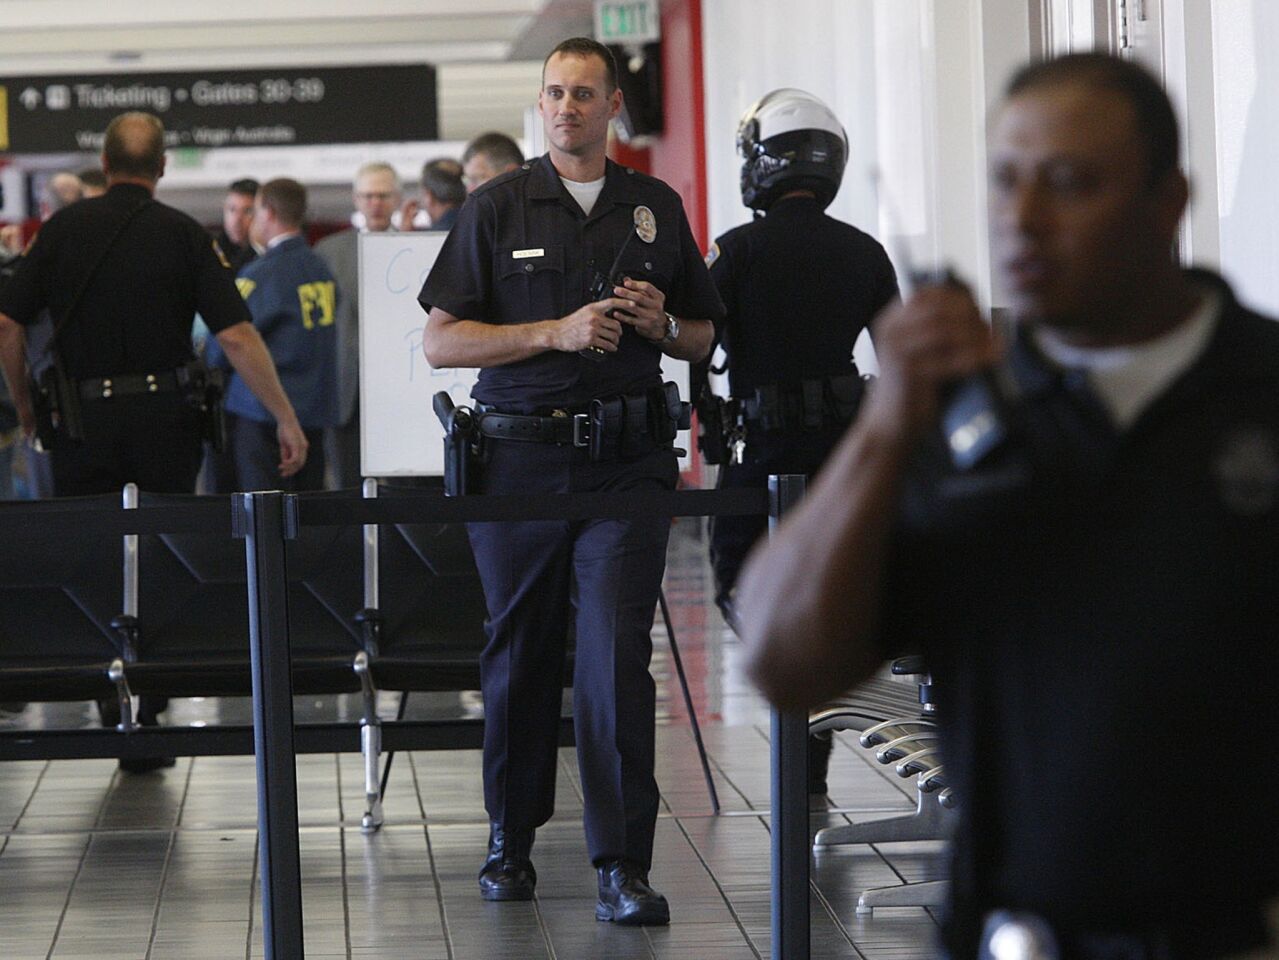 Law enforcement including the FBI, the Los Angeles Police Department, the Los Angeles Fire Department and LAX Airport Police gather in Terminal 3 at Los Angeles International Airport. A Transportation Security Administration agent was killed and several other people were wounded when a gunman opened fire at the airport. The attack caused widespread chaos, delaying flights and stranding thousands of passengers.